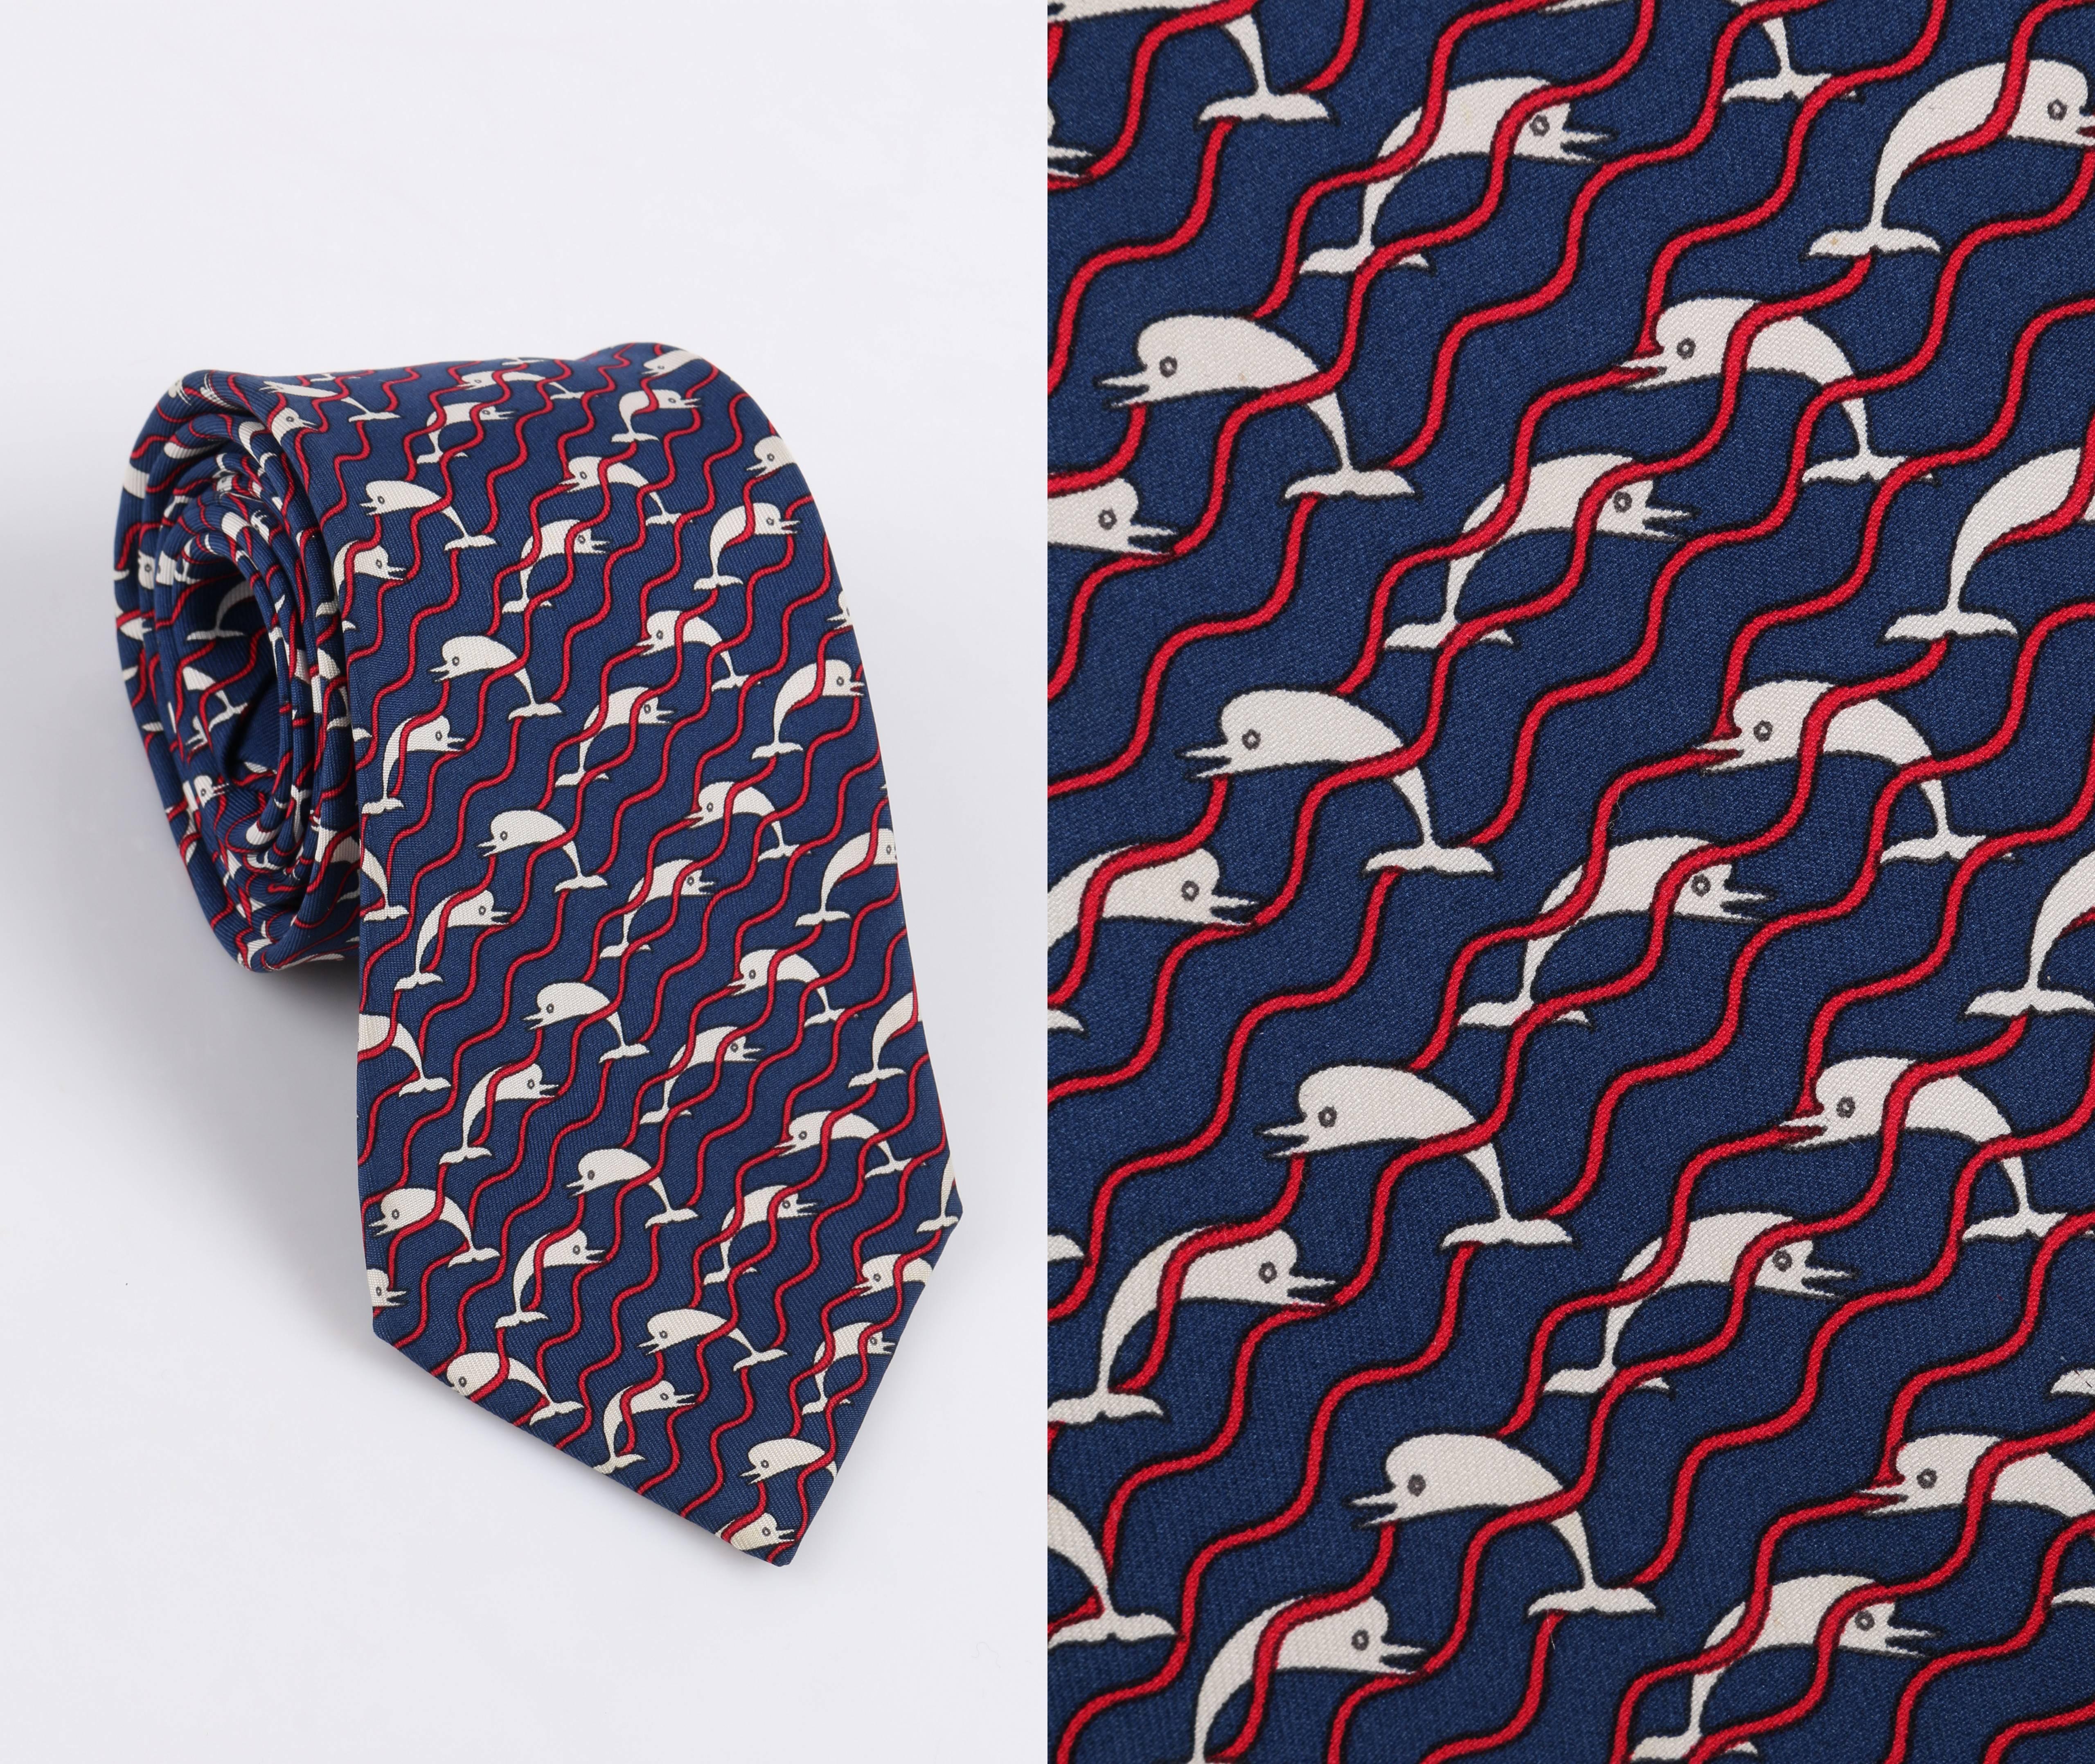 HERMES 5 Fold Navy Blue Dolphin Wave Stripe Print Silk Necktie Tie 987 SA

Brand / Manufacturer: Hermes
Manufacture Style Name: 987 SA
Style: 5 fold Necktie
Color(s):  Shades of blue, white, and red
Lined: Yes
Marked Fabric Content: 100% silk
Made